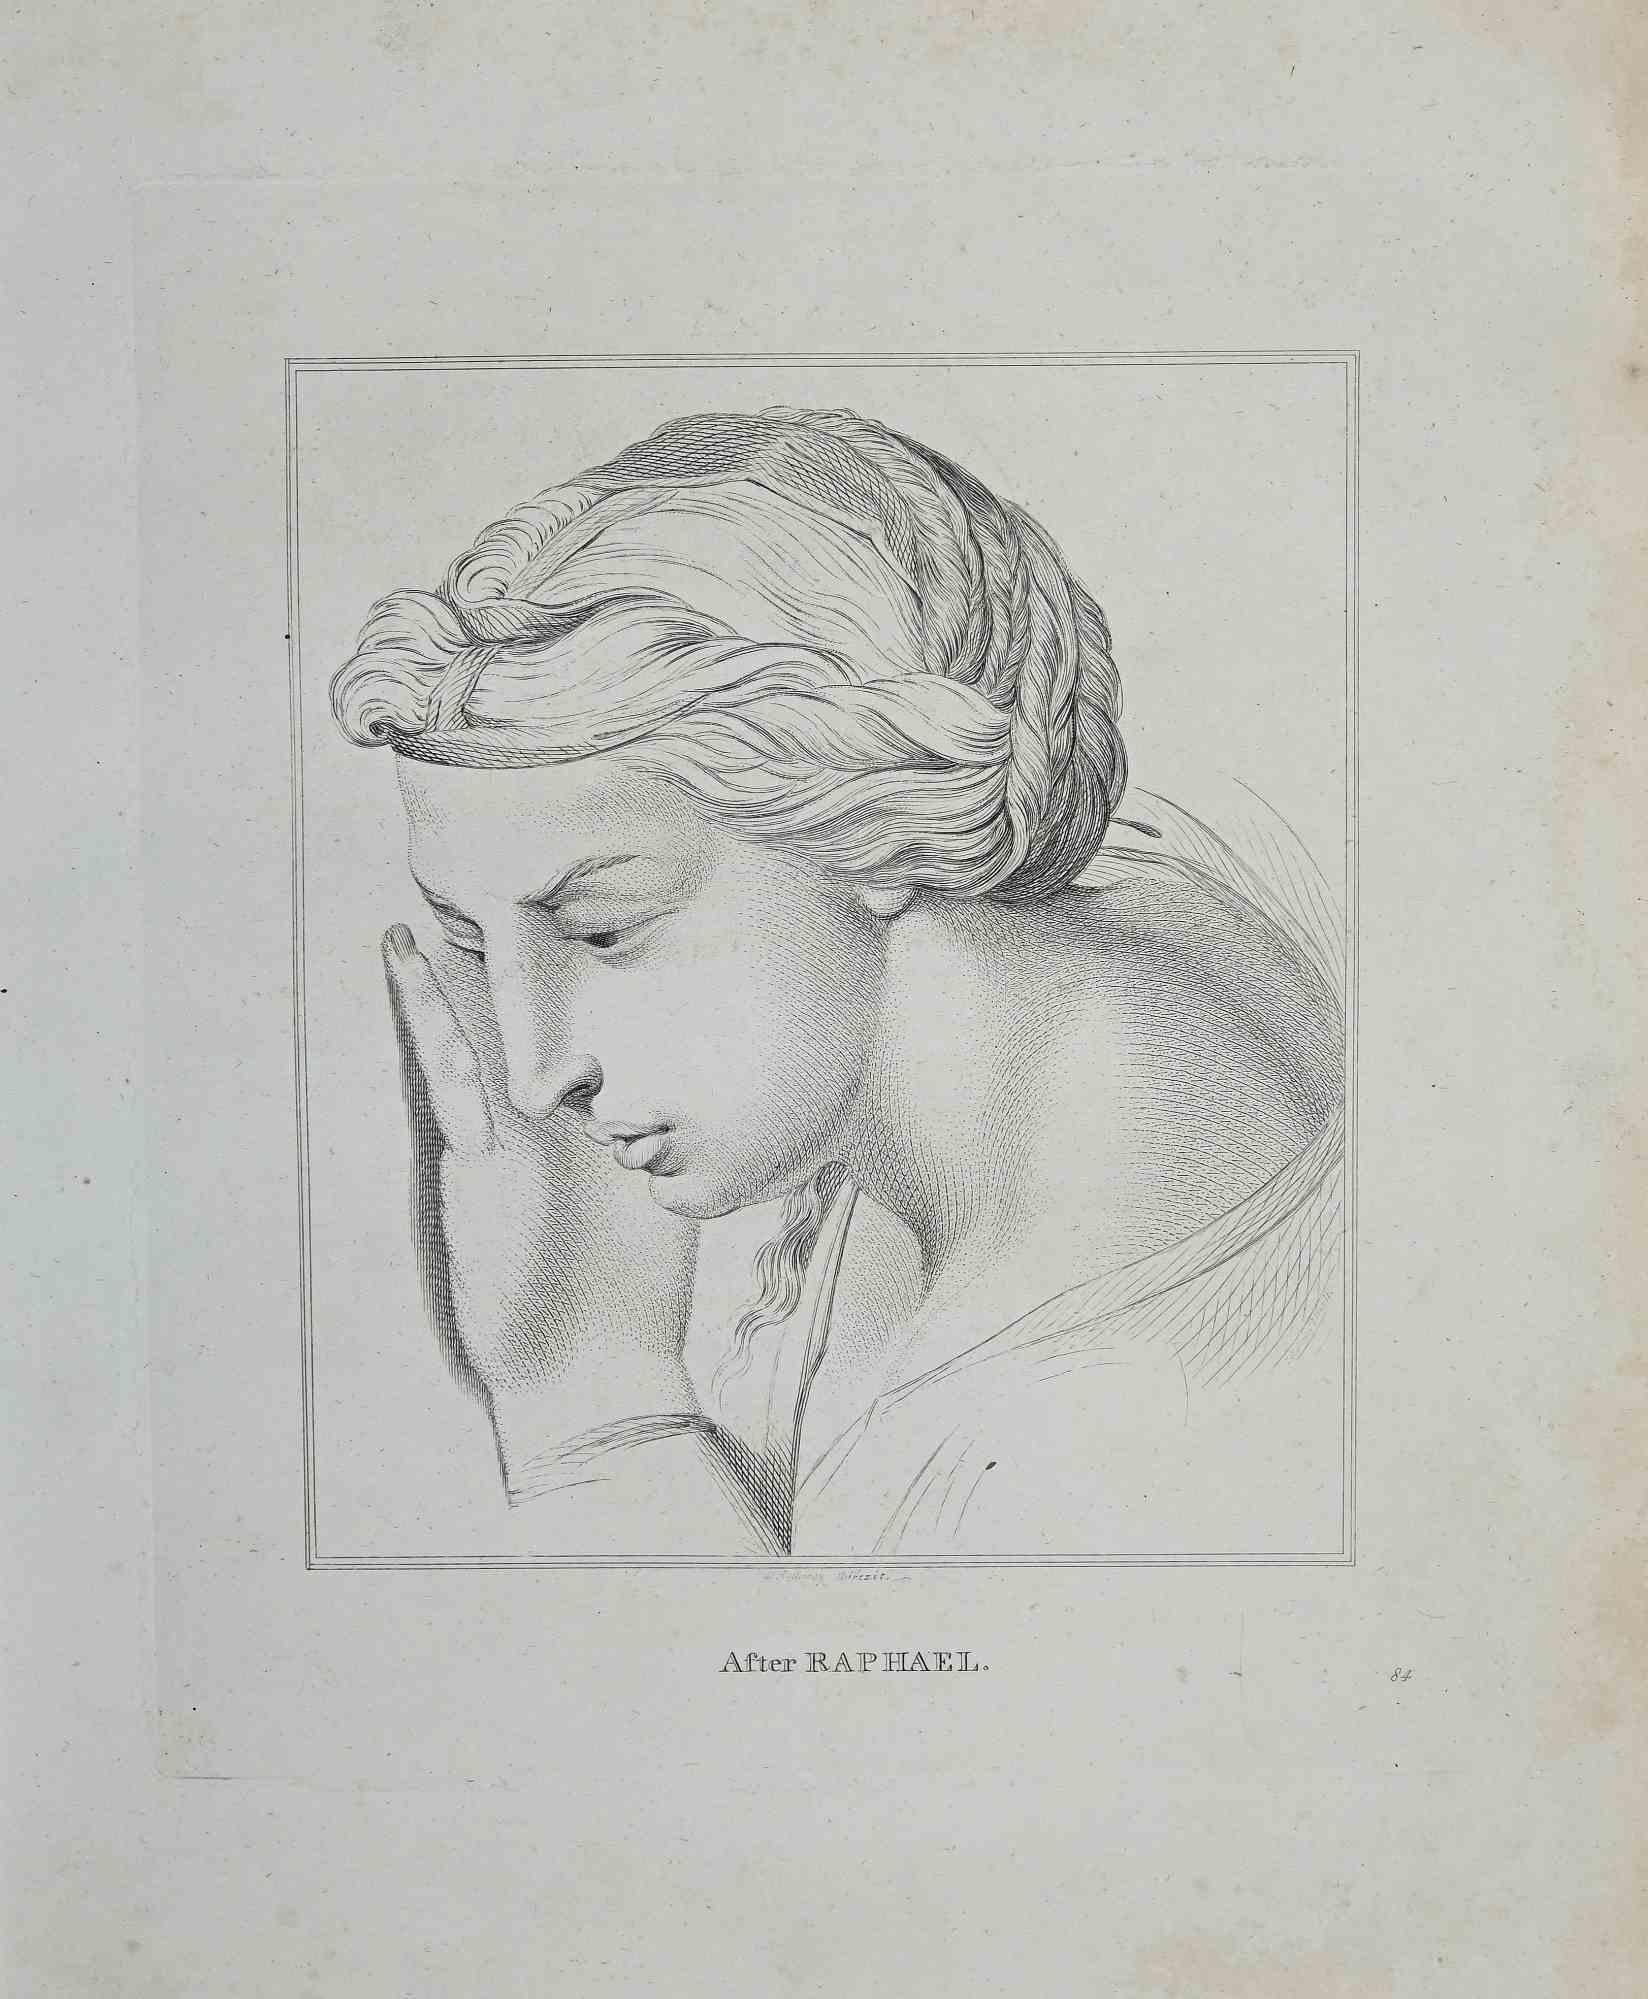 Portrait of After Raphael is an original artwork realized by Thomas Holloway (1748 - 1827).

Original Etching from J.C. Lavater's "Essays on Physiognomy, Designed to promote the Knowledge and the Love of Mankind", London, Bensley, 1810. 

A the